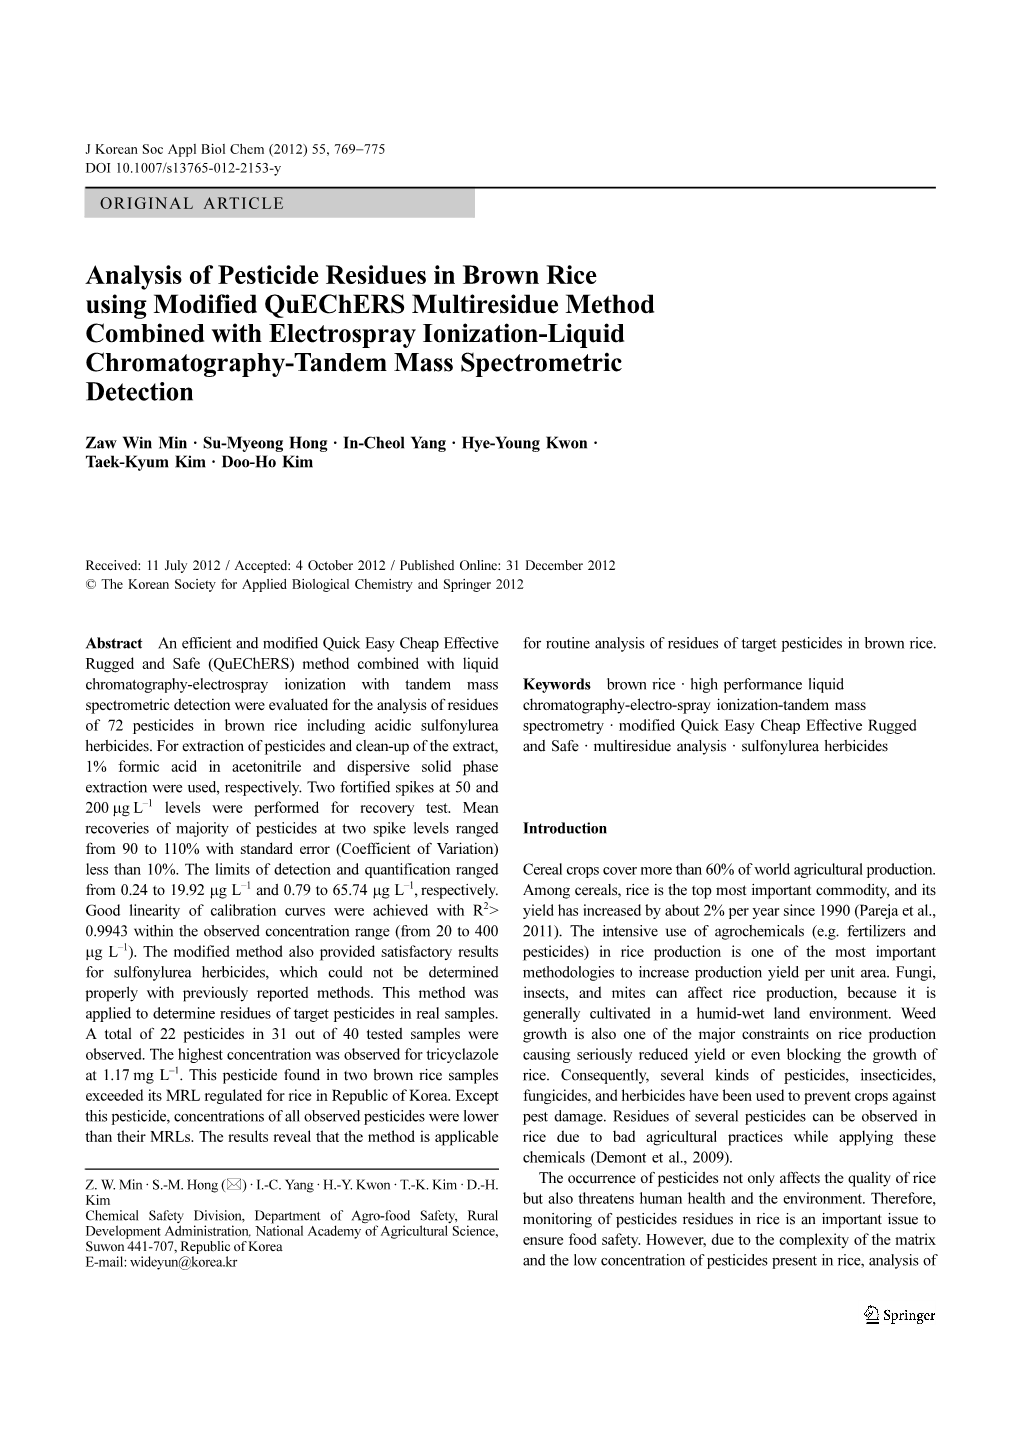 Analysis of Pesticide Residues in Brown Rice Using Modified